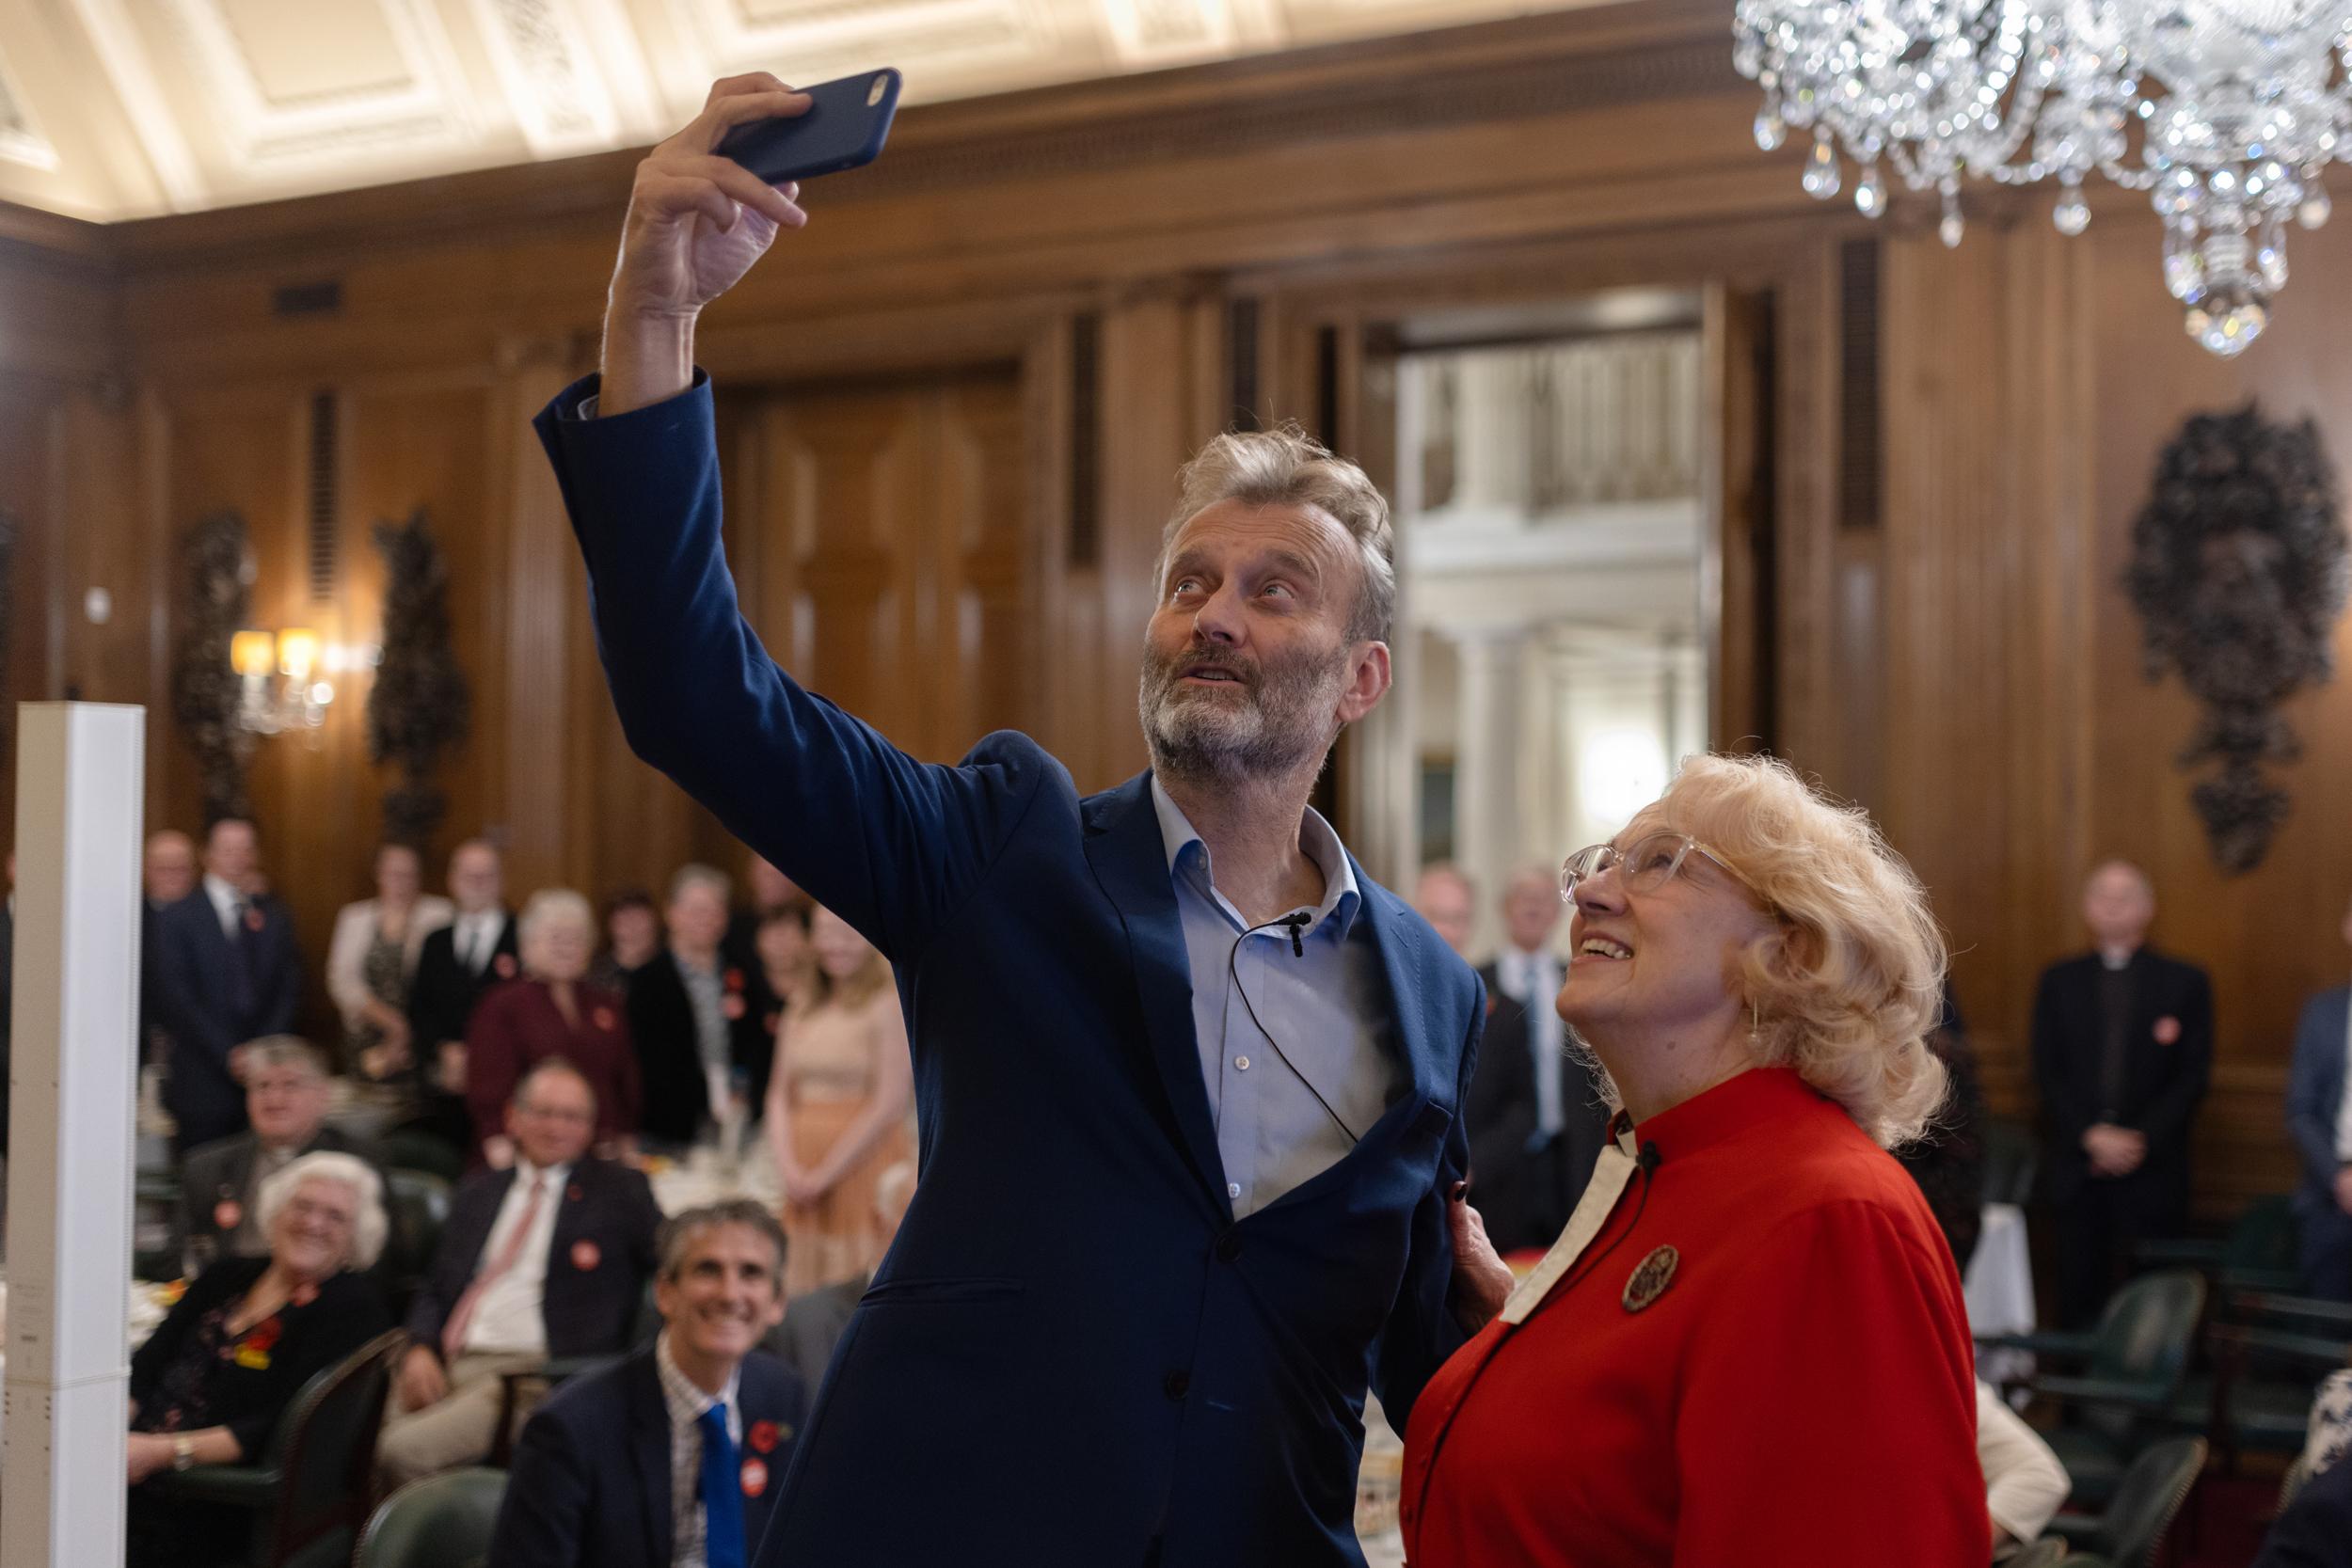 Image shows a selfie being taken at the National Church Awards